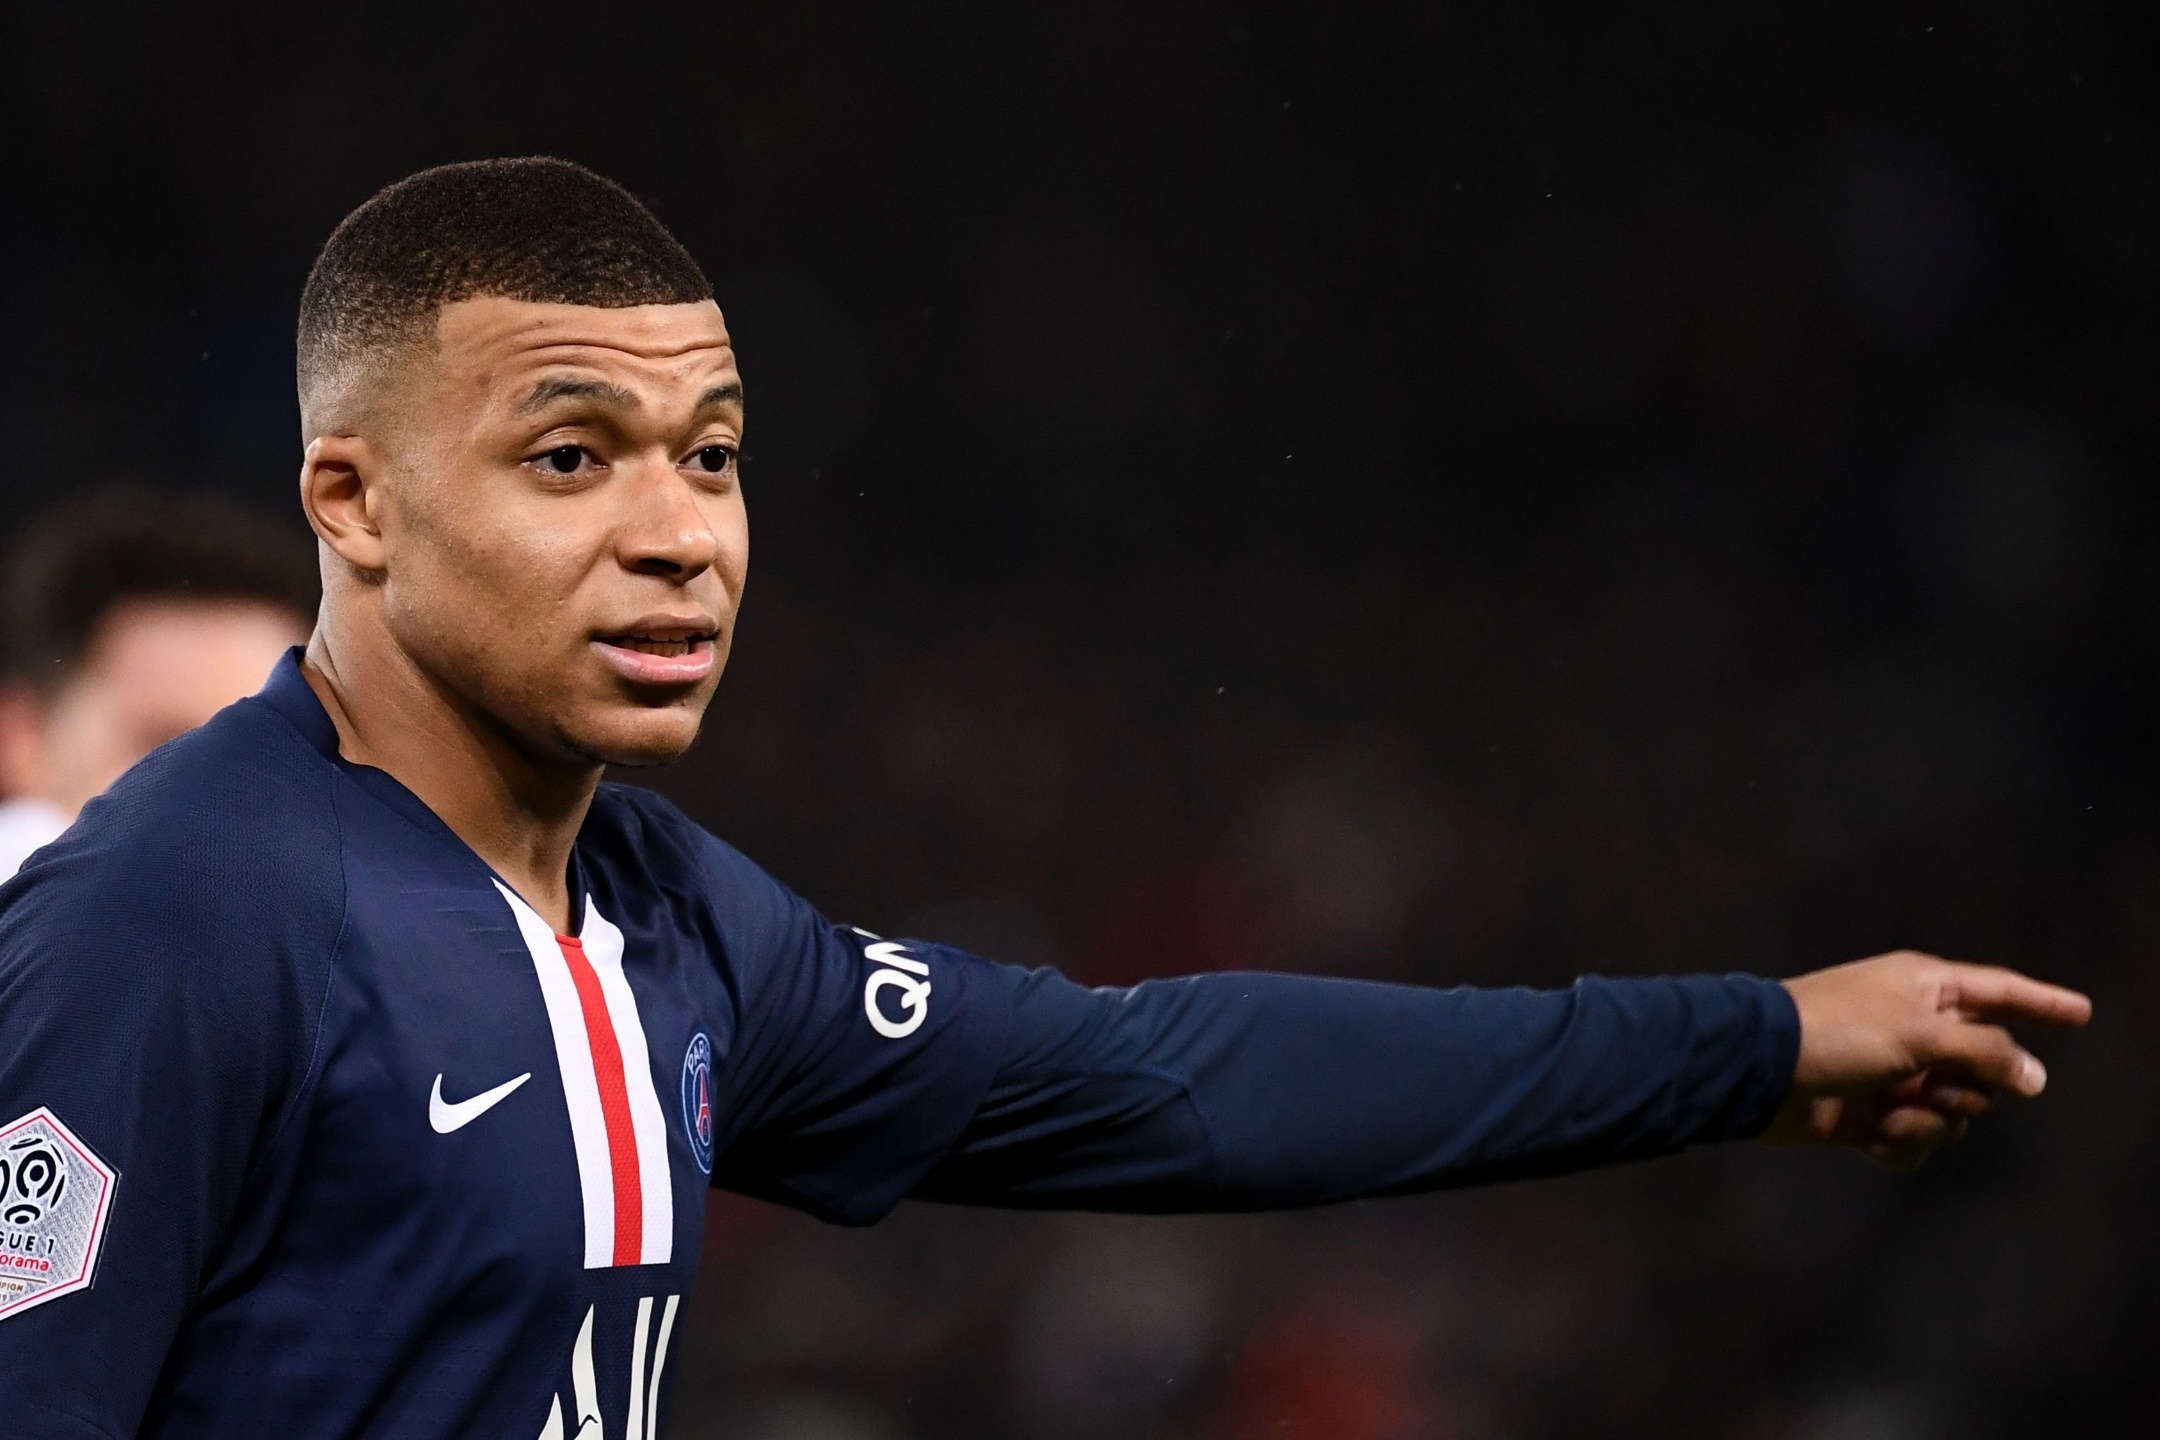 Mbappe will cost just £35m after coronavirus crisis, claims French politician